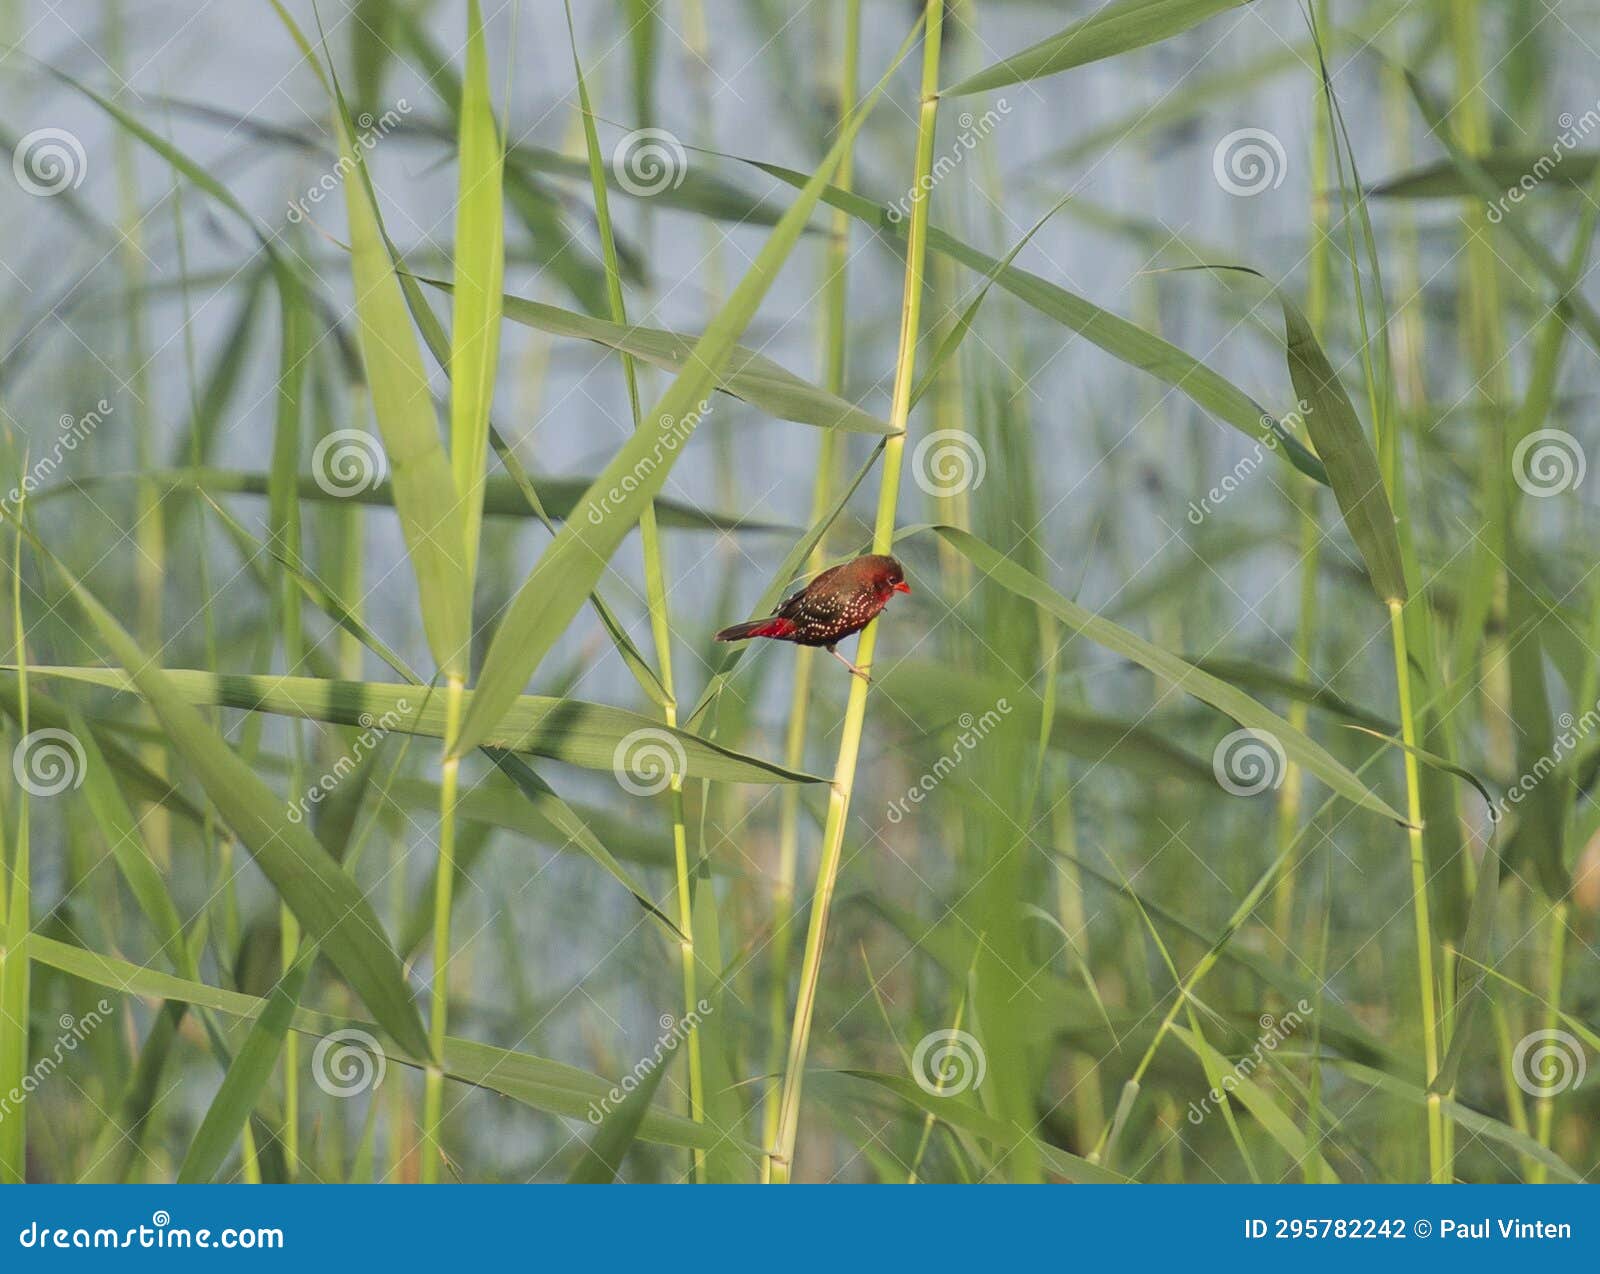 Red Avadavat Perched on Grass Reeds by River Bank Stock Photo - Image ...